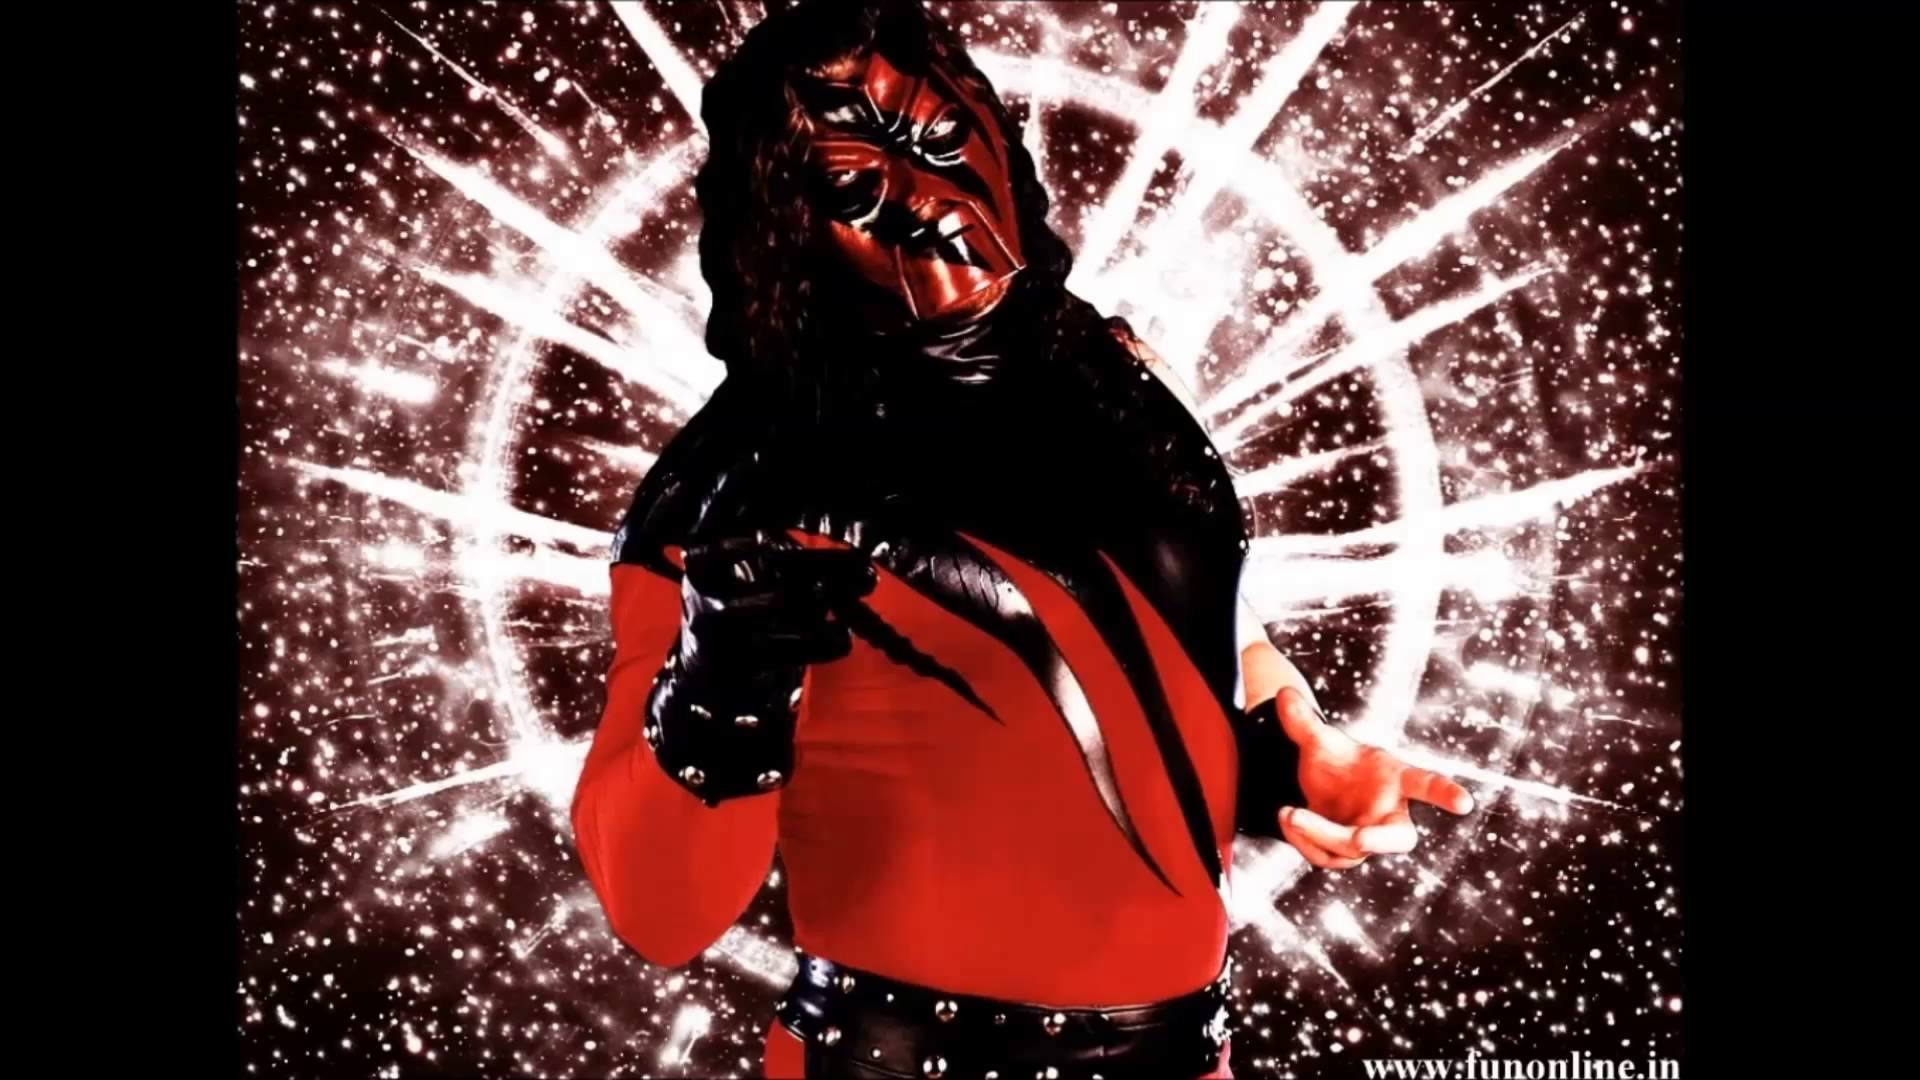 1920x1080 [WWE] | Masked Kane old Theme Song | Â´Out of the fireÂ´ | 2000 pyro effect